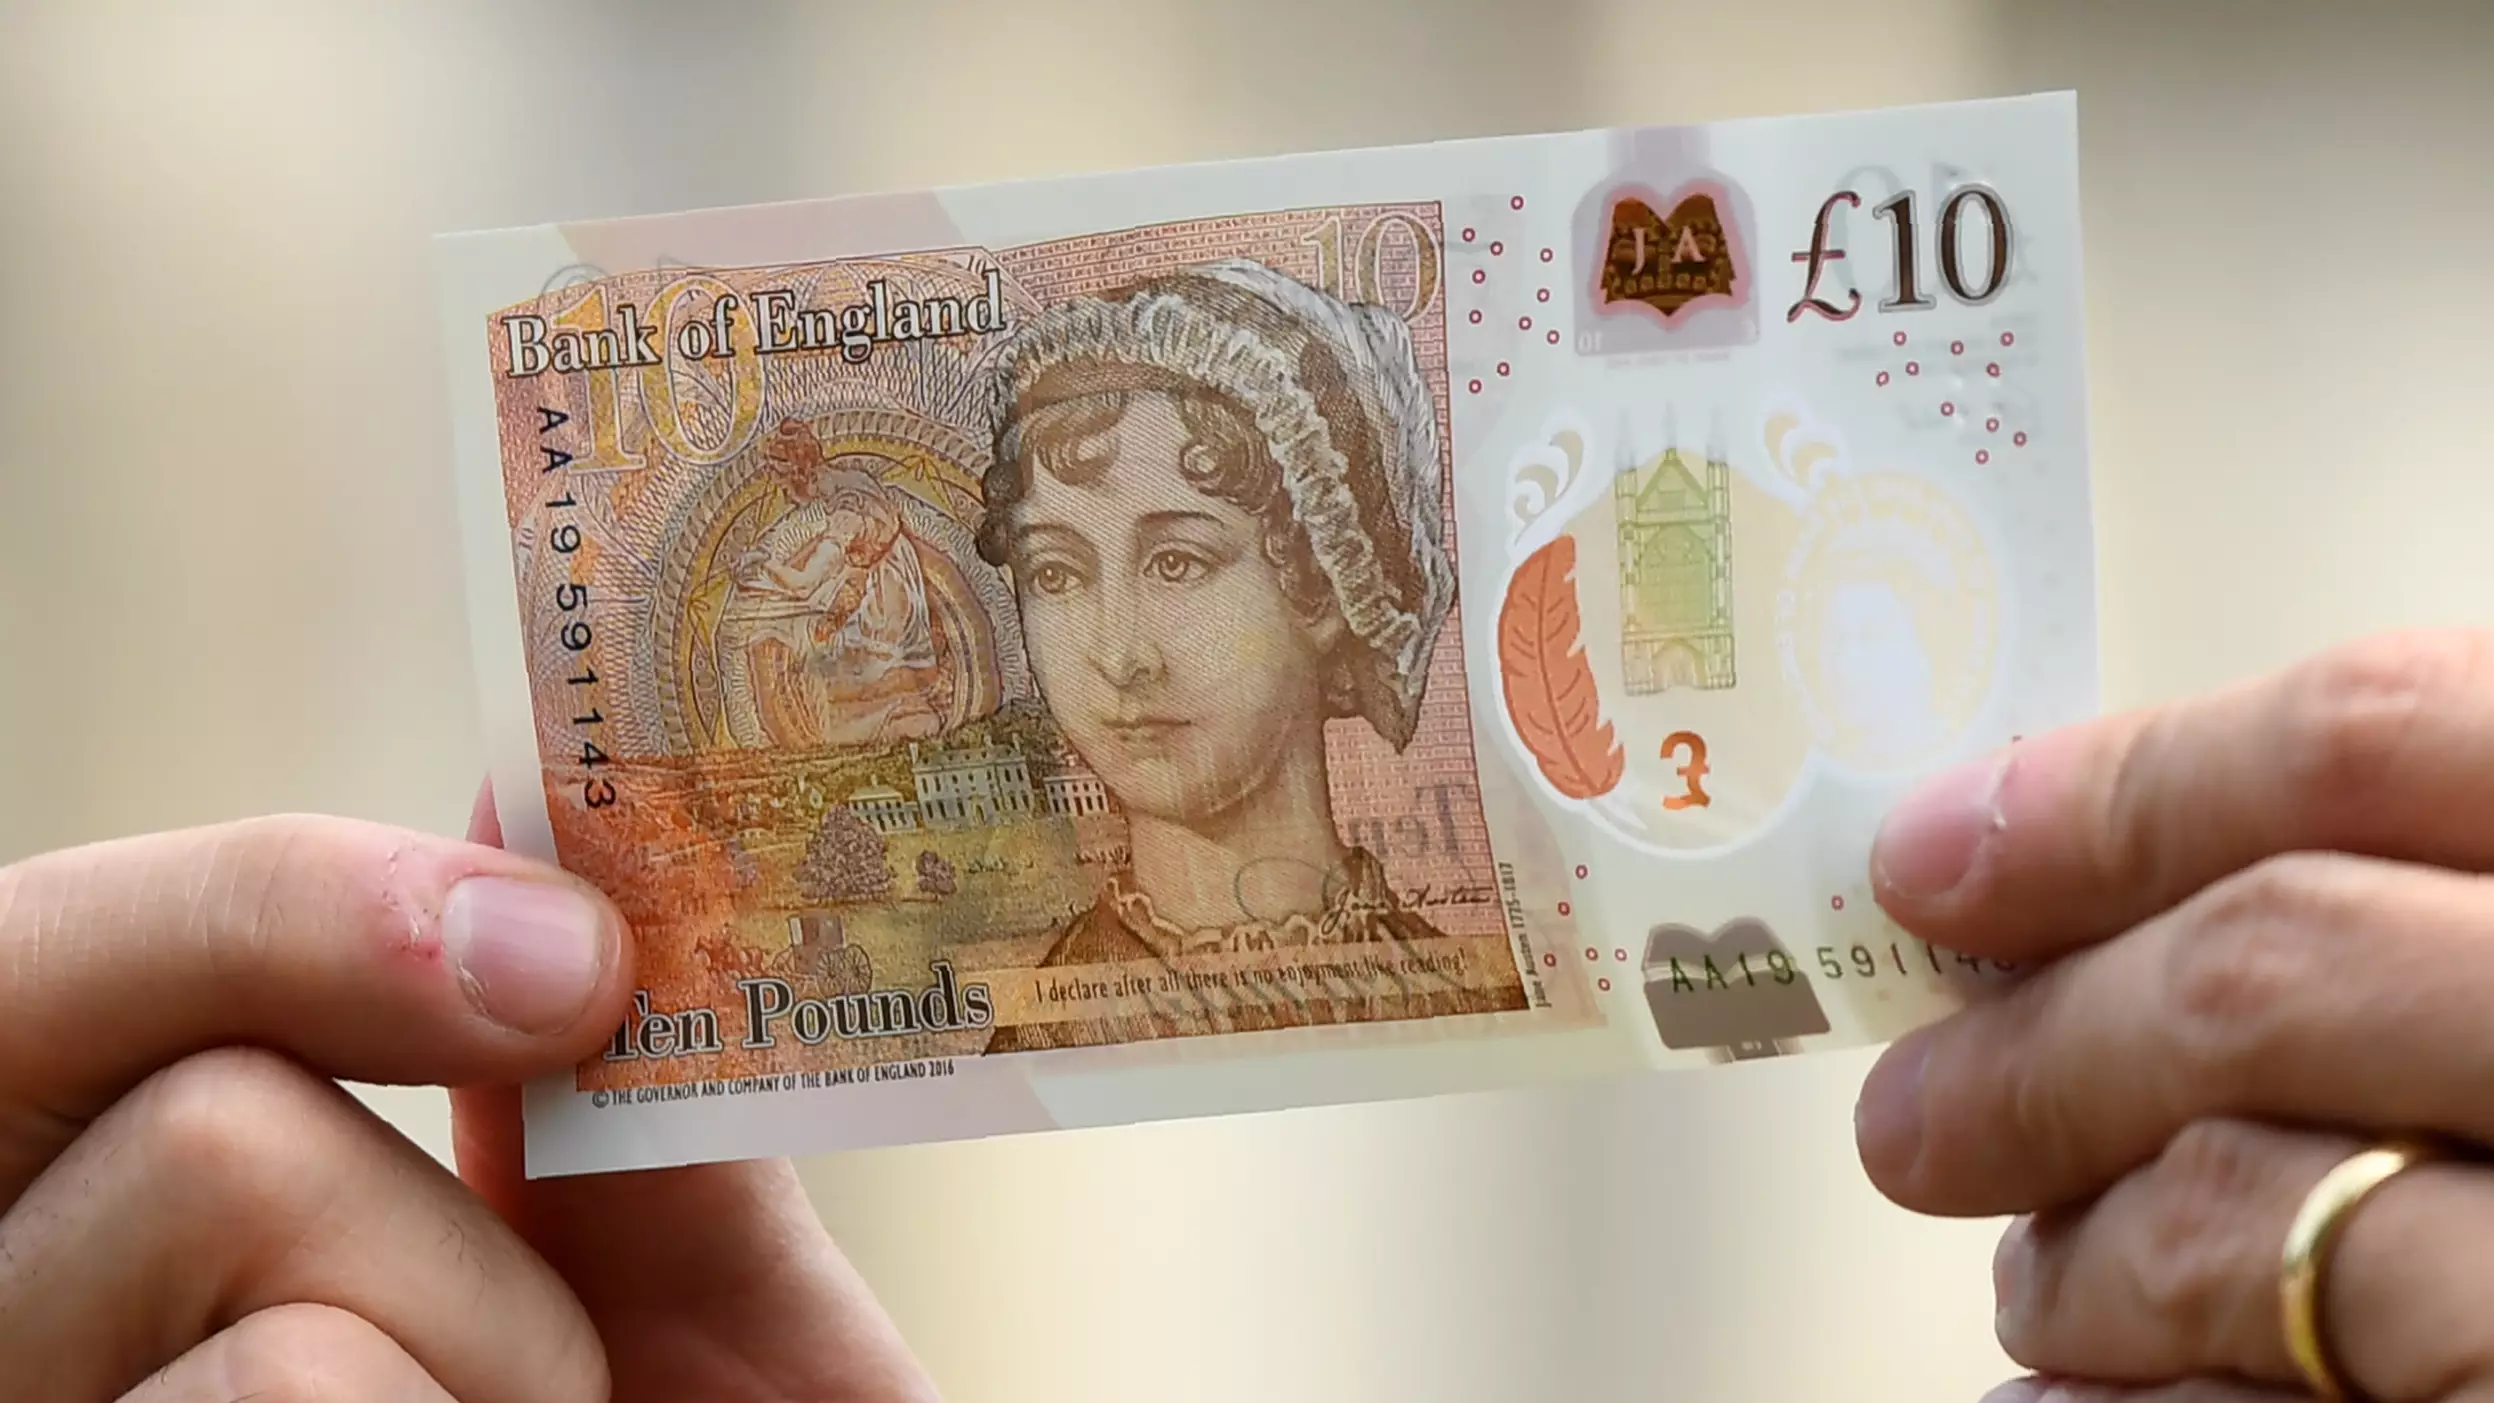 New £10 Notes Released Today, But When Do We Need To Spend The Old Ones By?